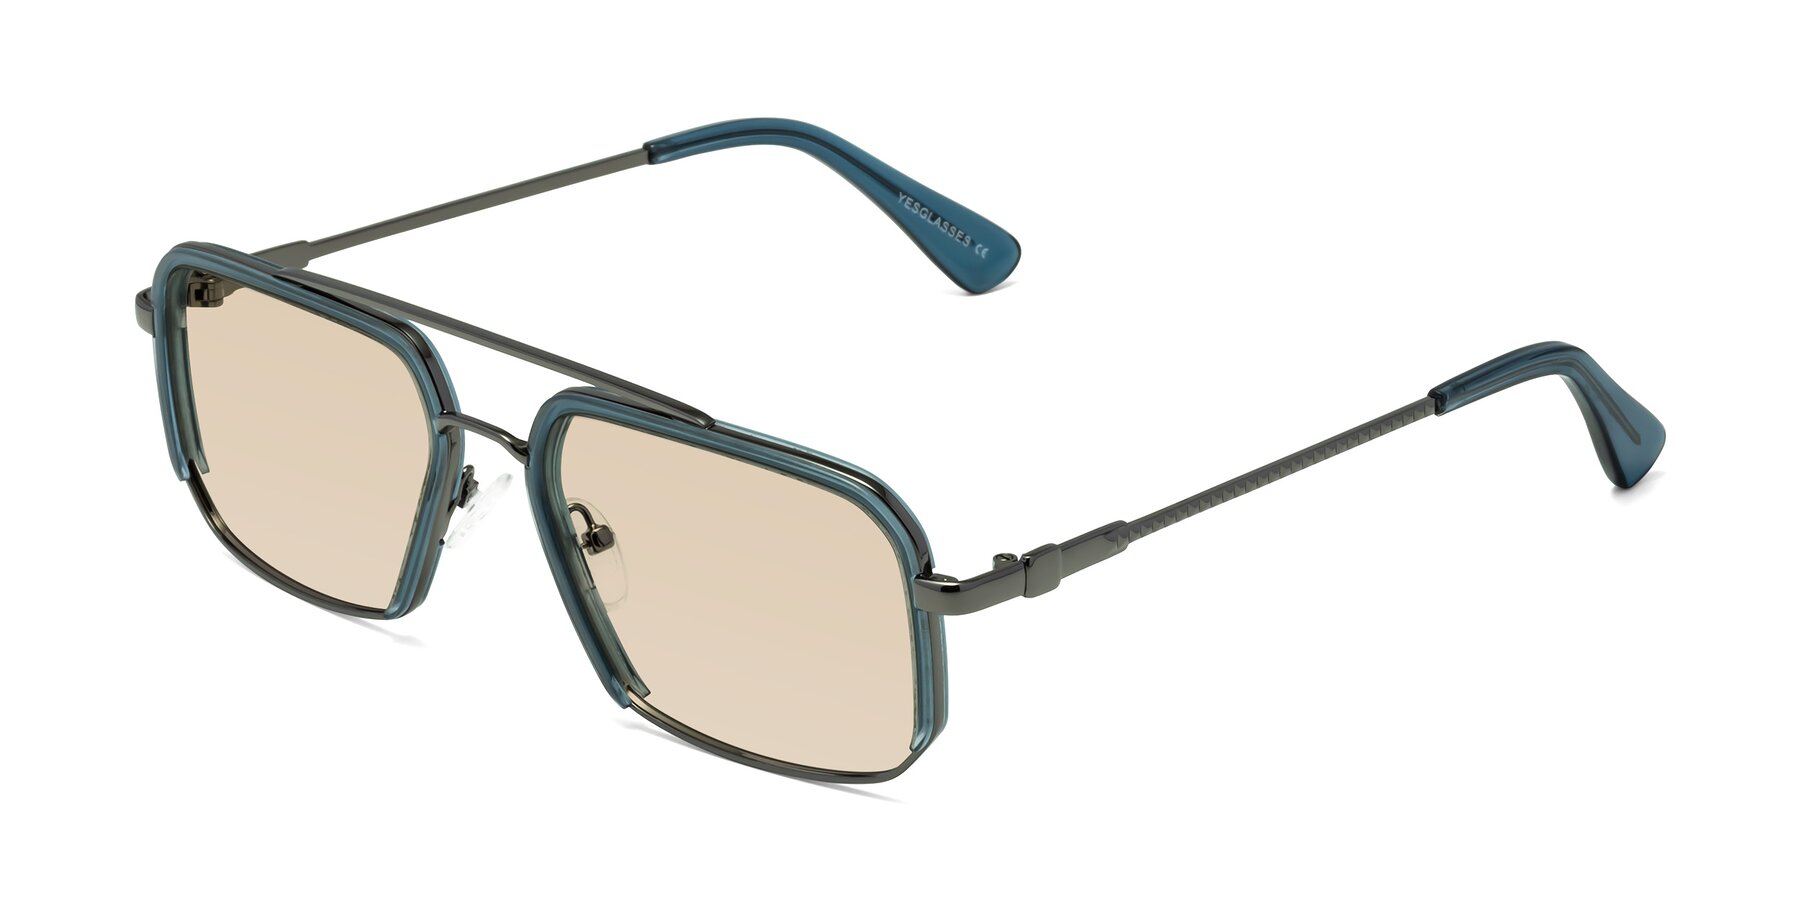 Angle of Dechter in Teal-Gunmetal with Light Brown Tinted Lenses